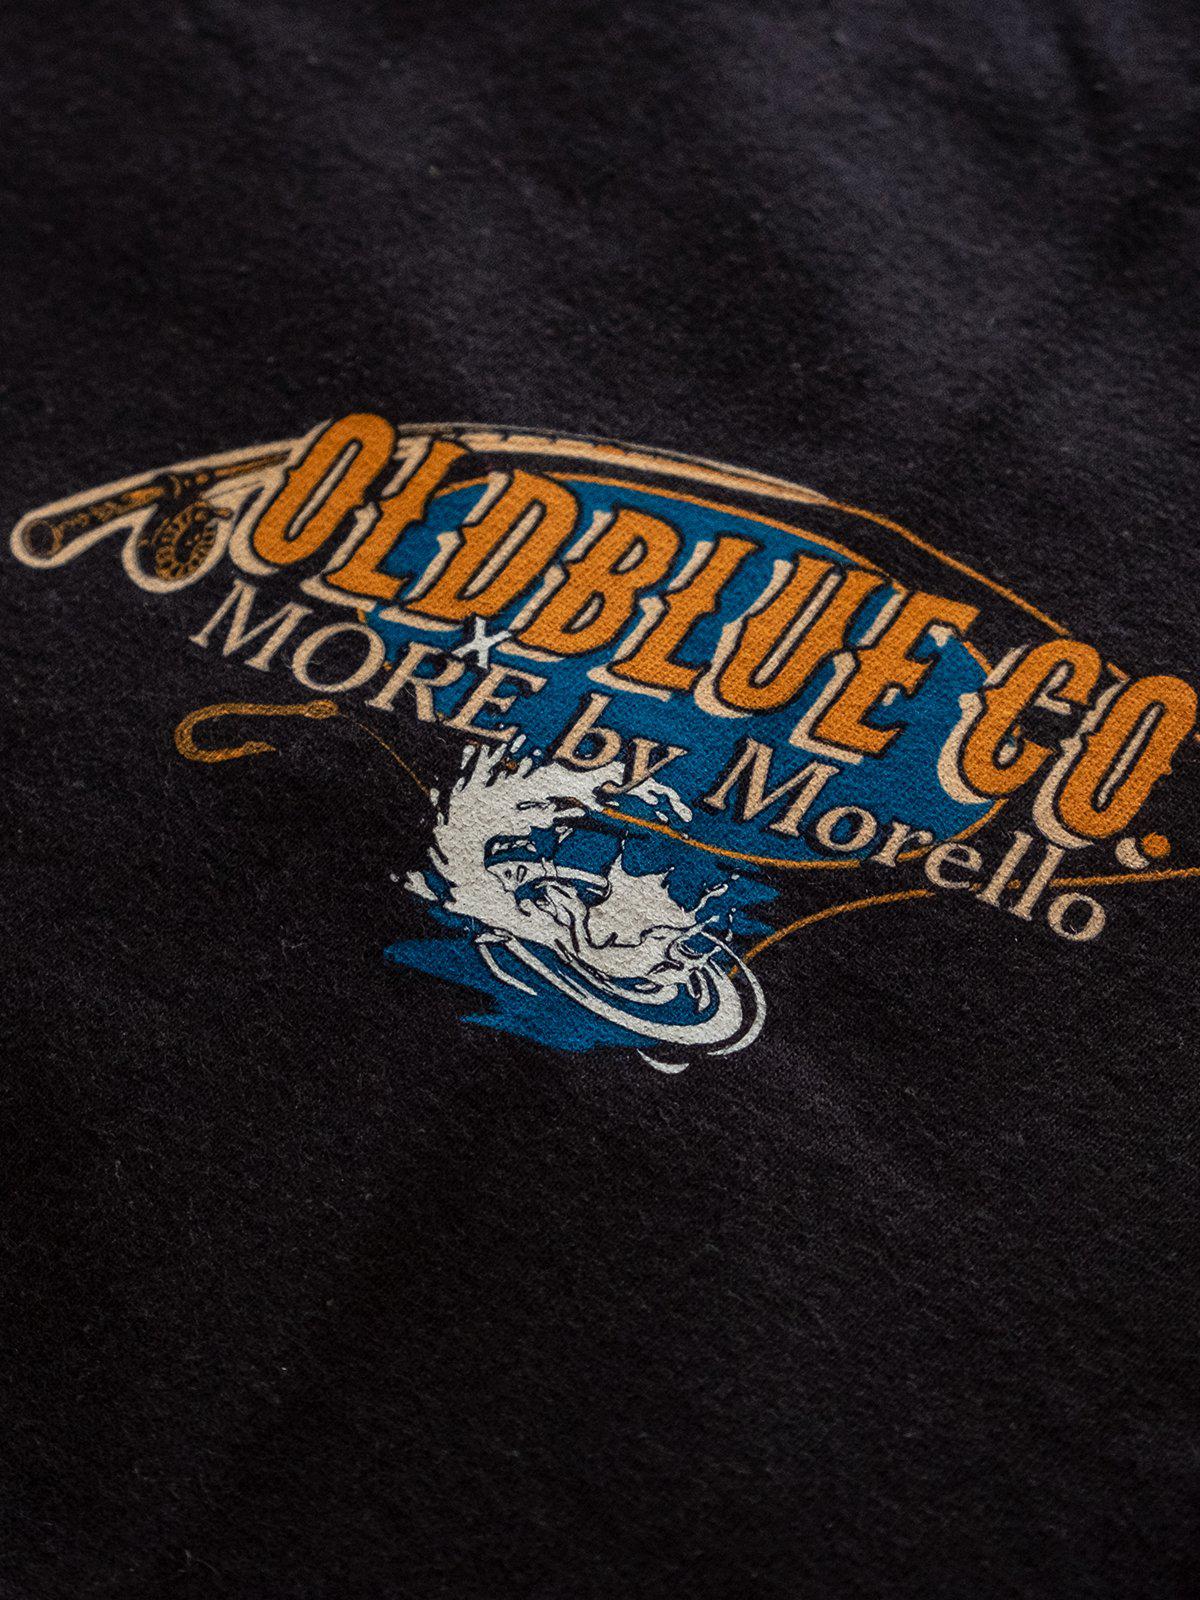 Oldblue Co. x MORE by Morello Tee The Outdoor Journeys Black - MORE by Morello Indonesia